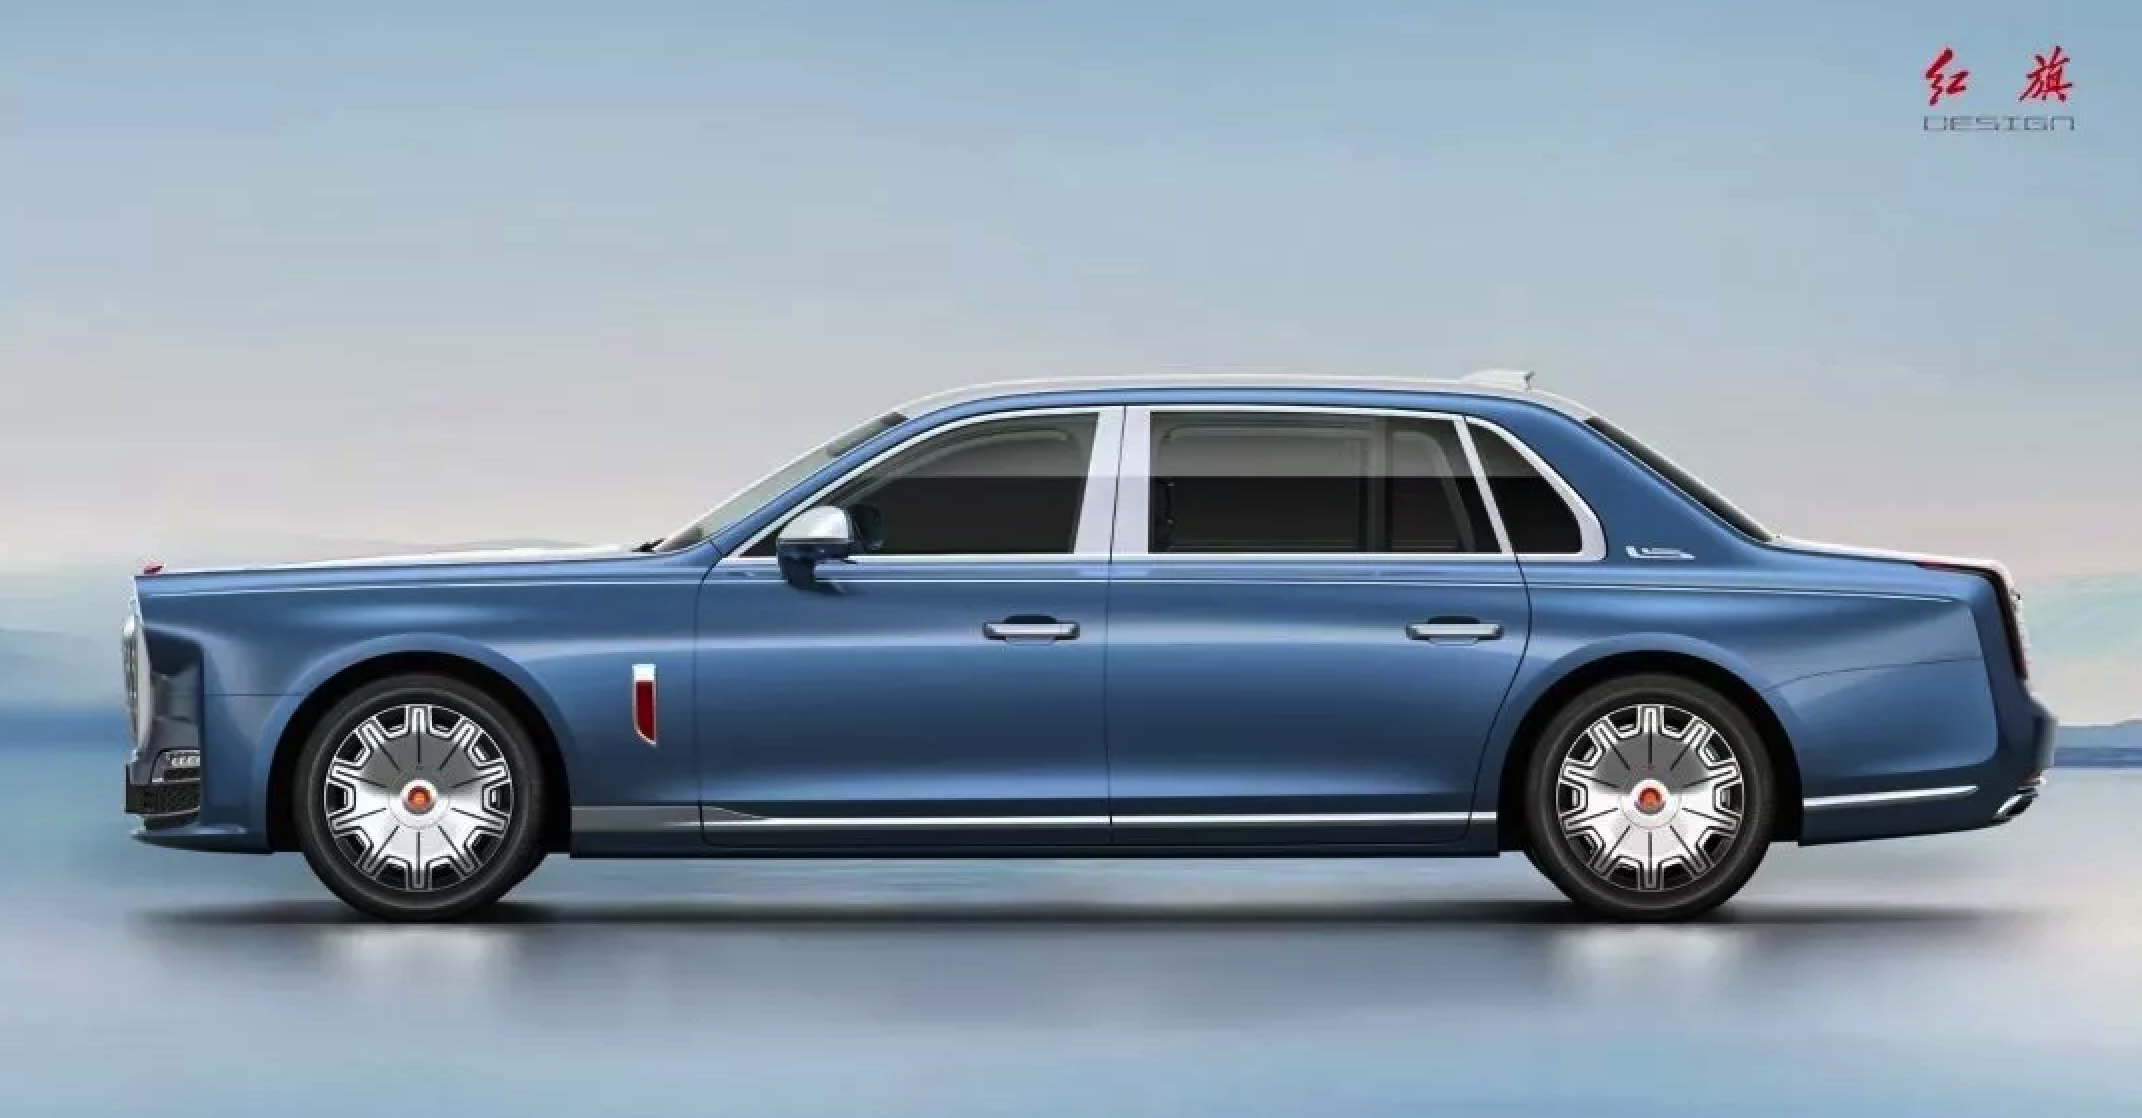 hongqi l5: china’s rolls-royce is back with a refreshed design